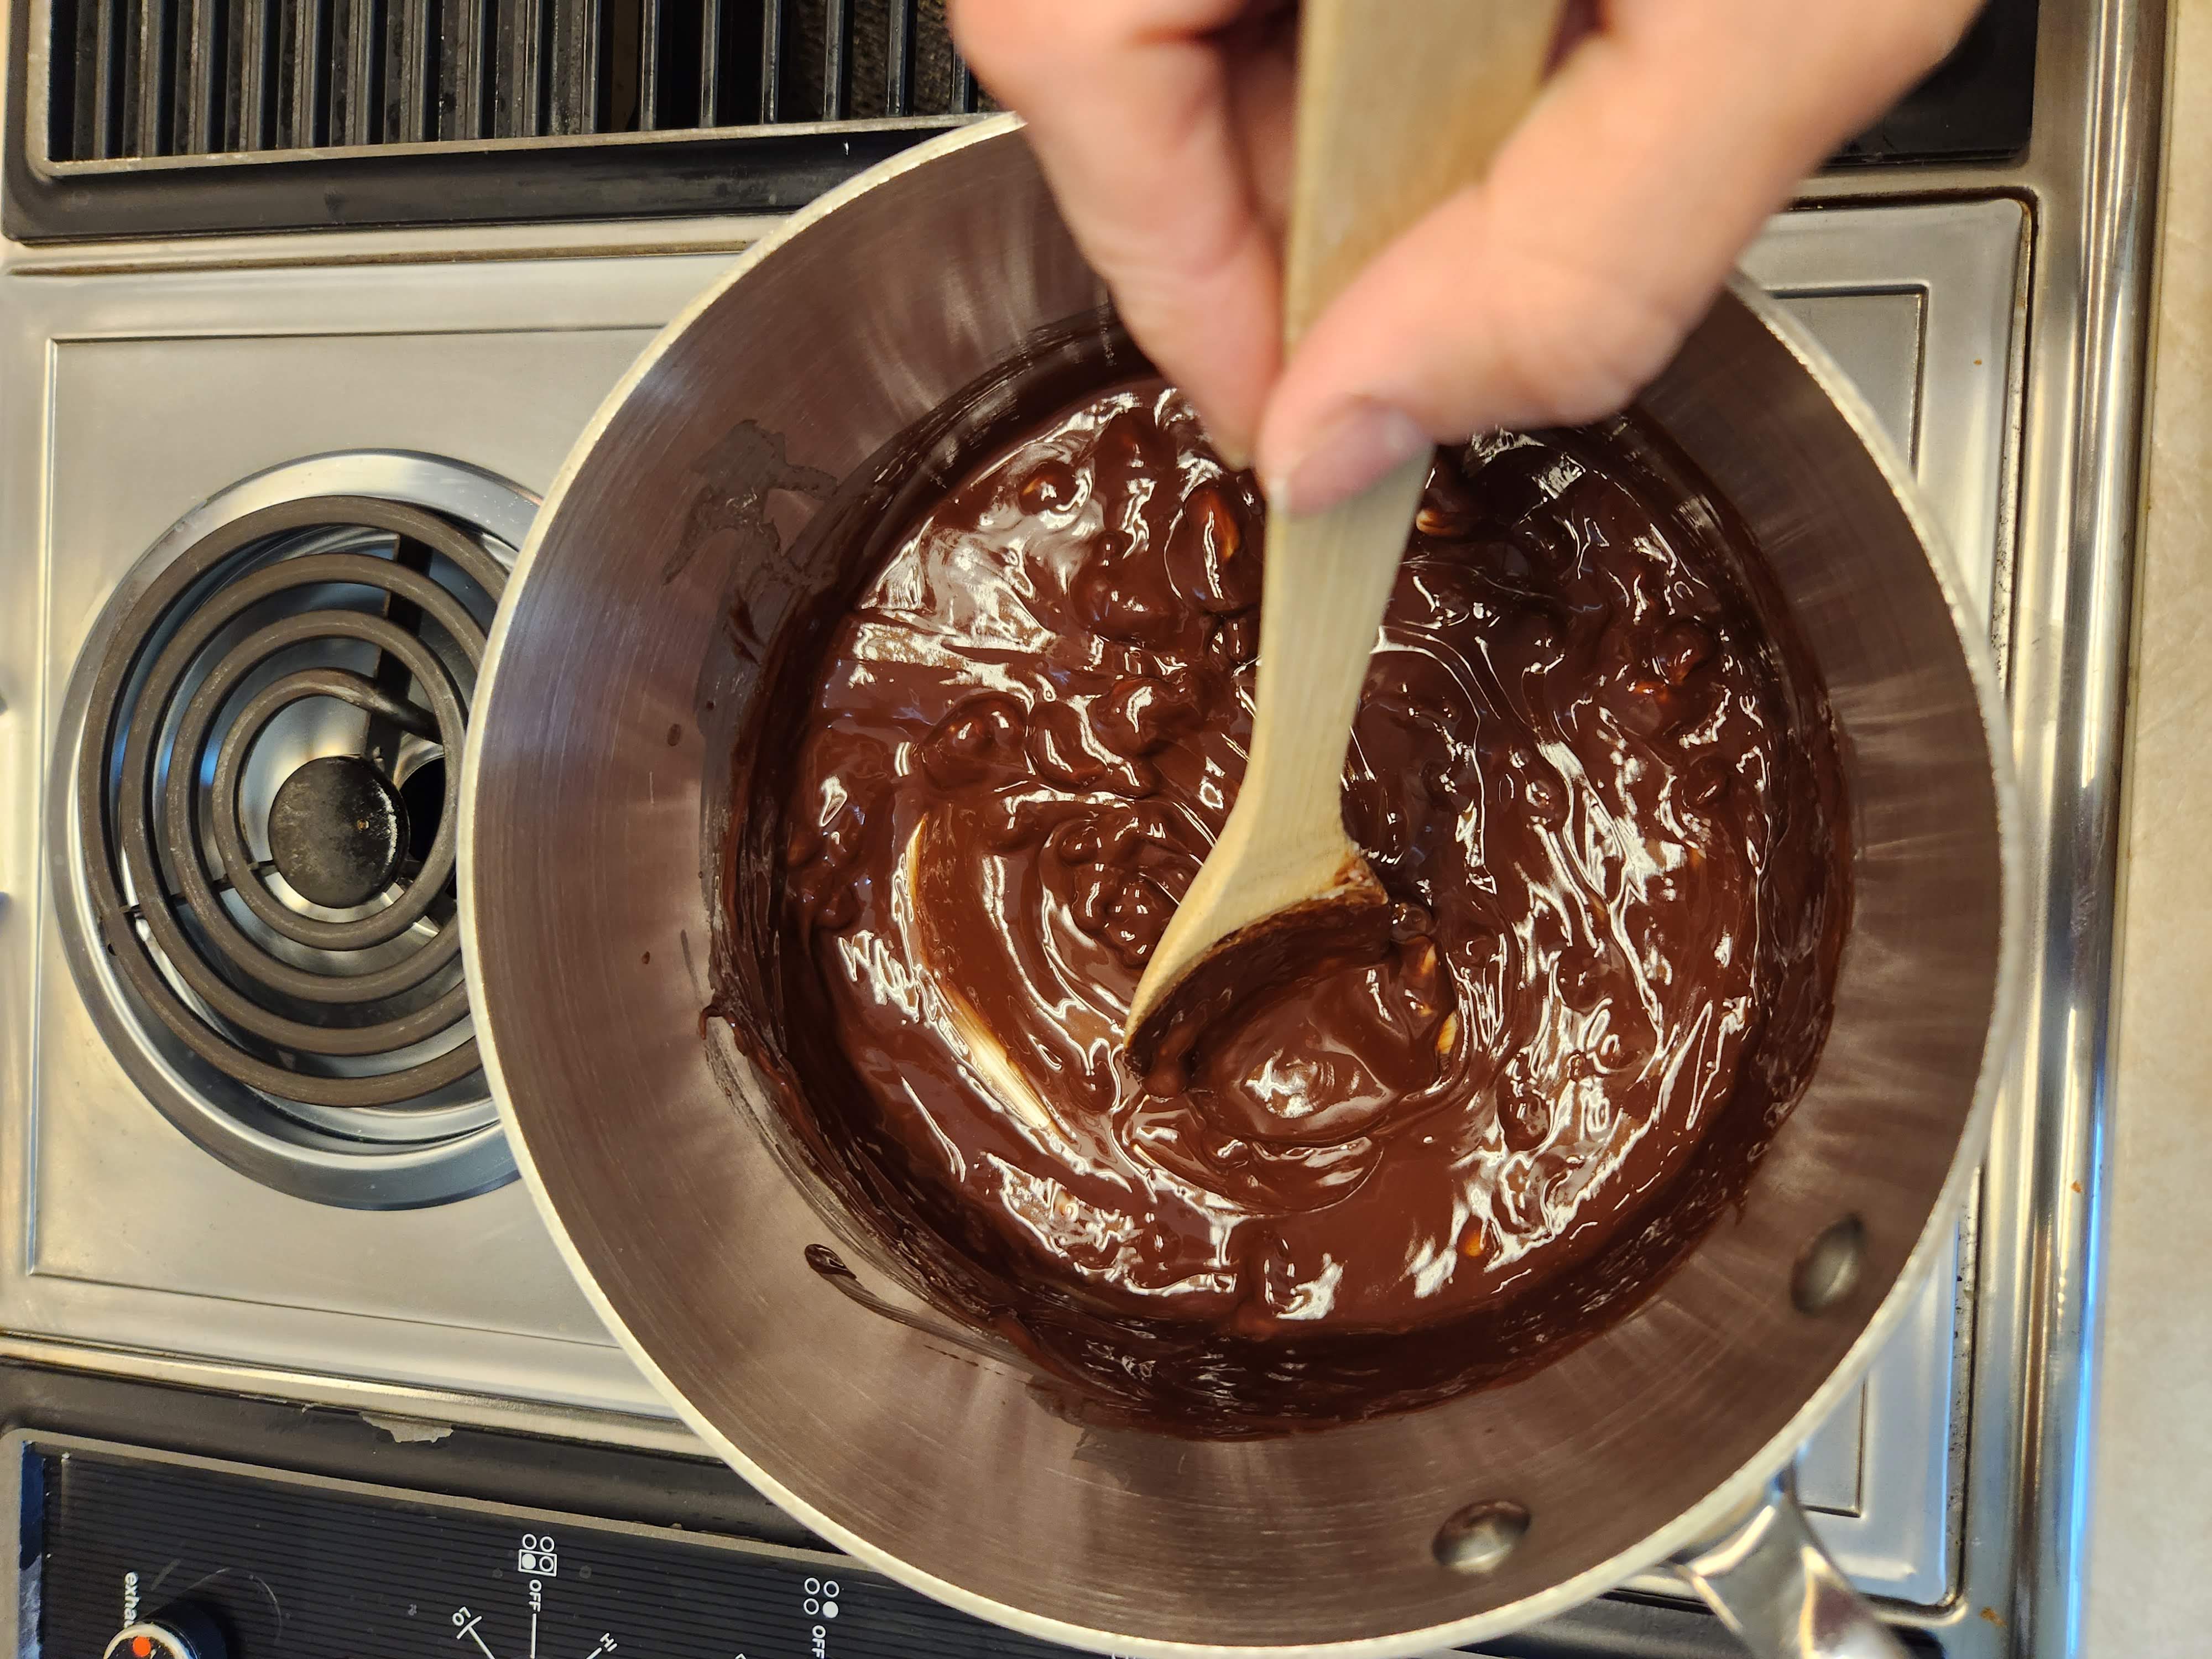 butter and chocolate chips melted in a pot